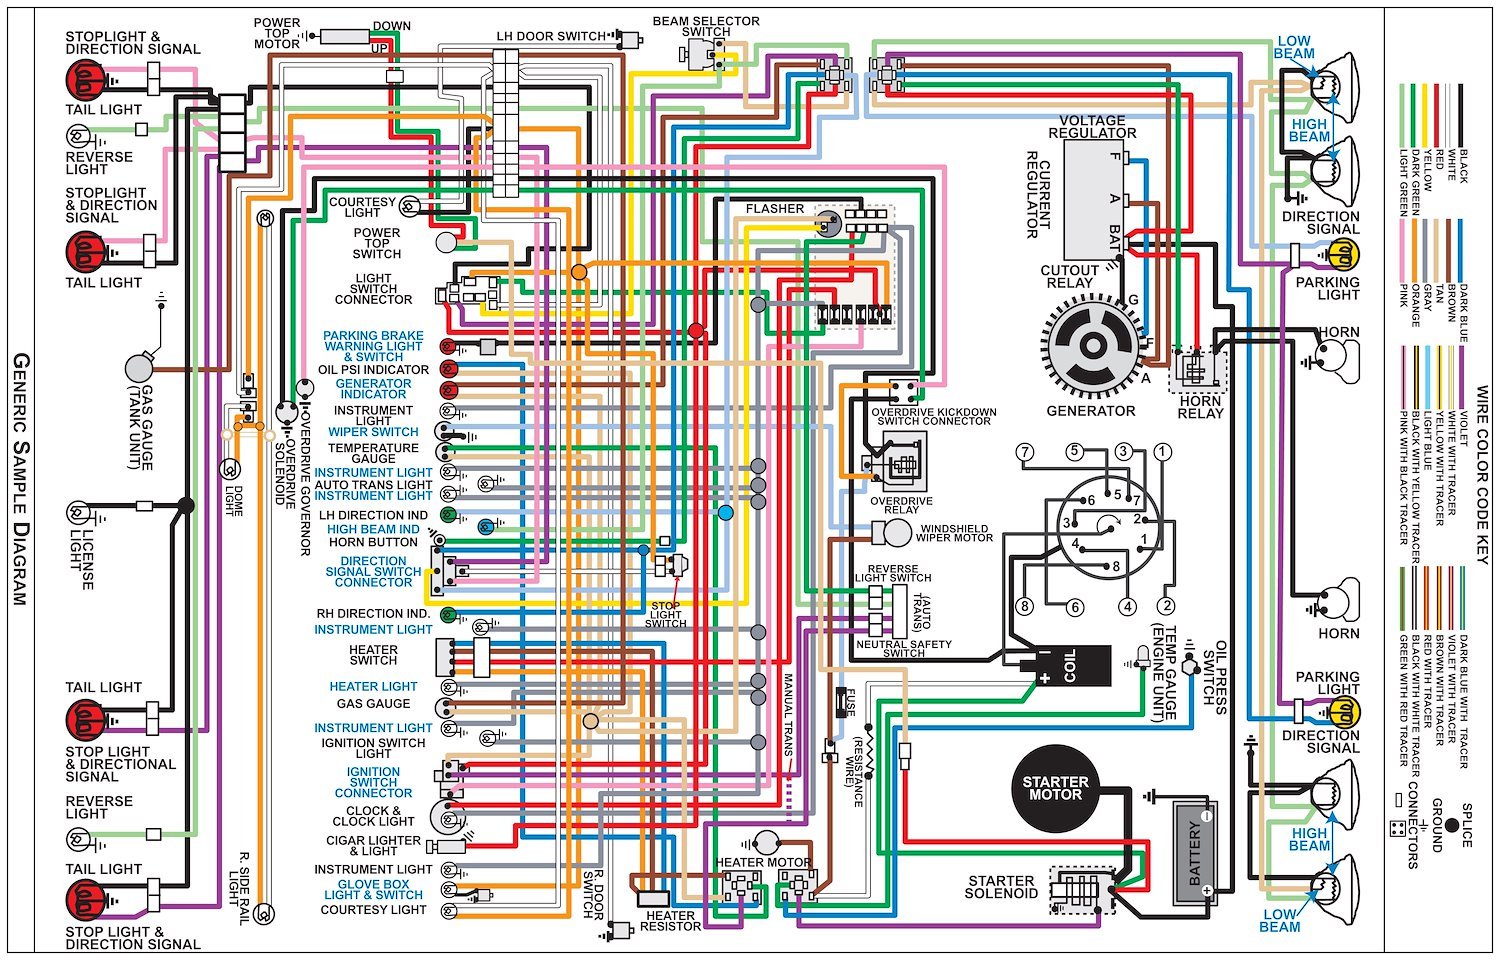 Wiring Diagram for 1970 Ford F-Series Truck, 11 in x 17 in., Laminated